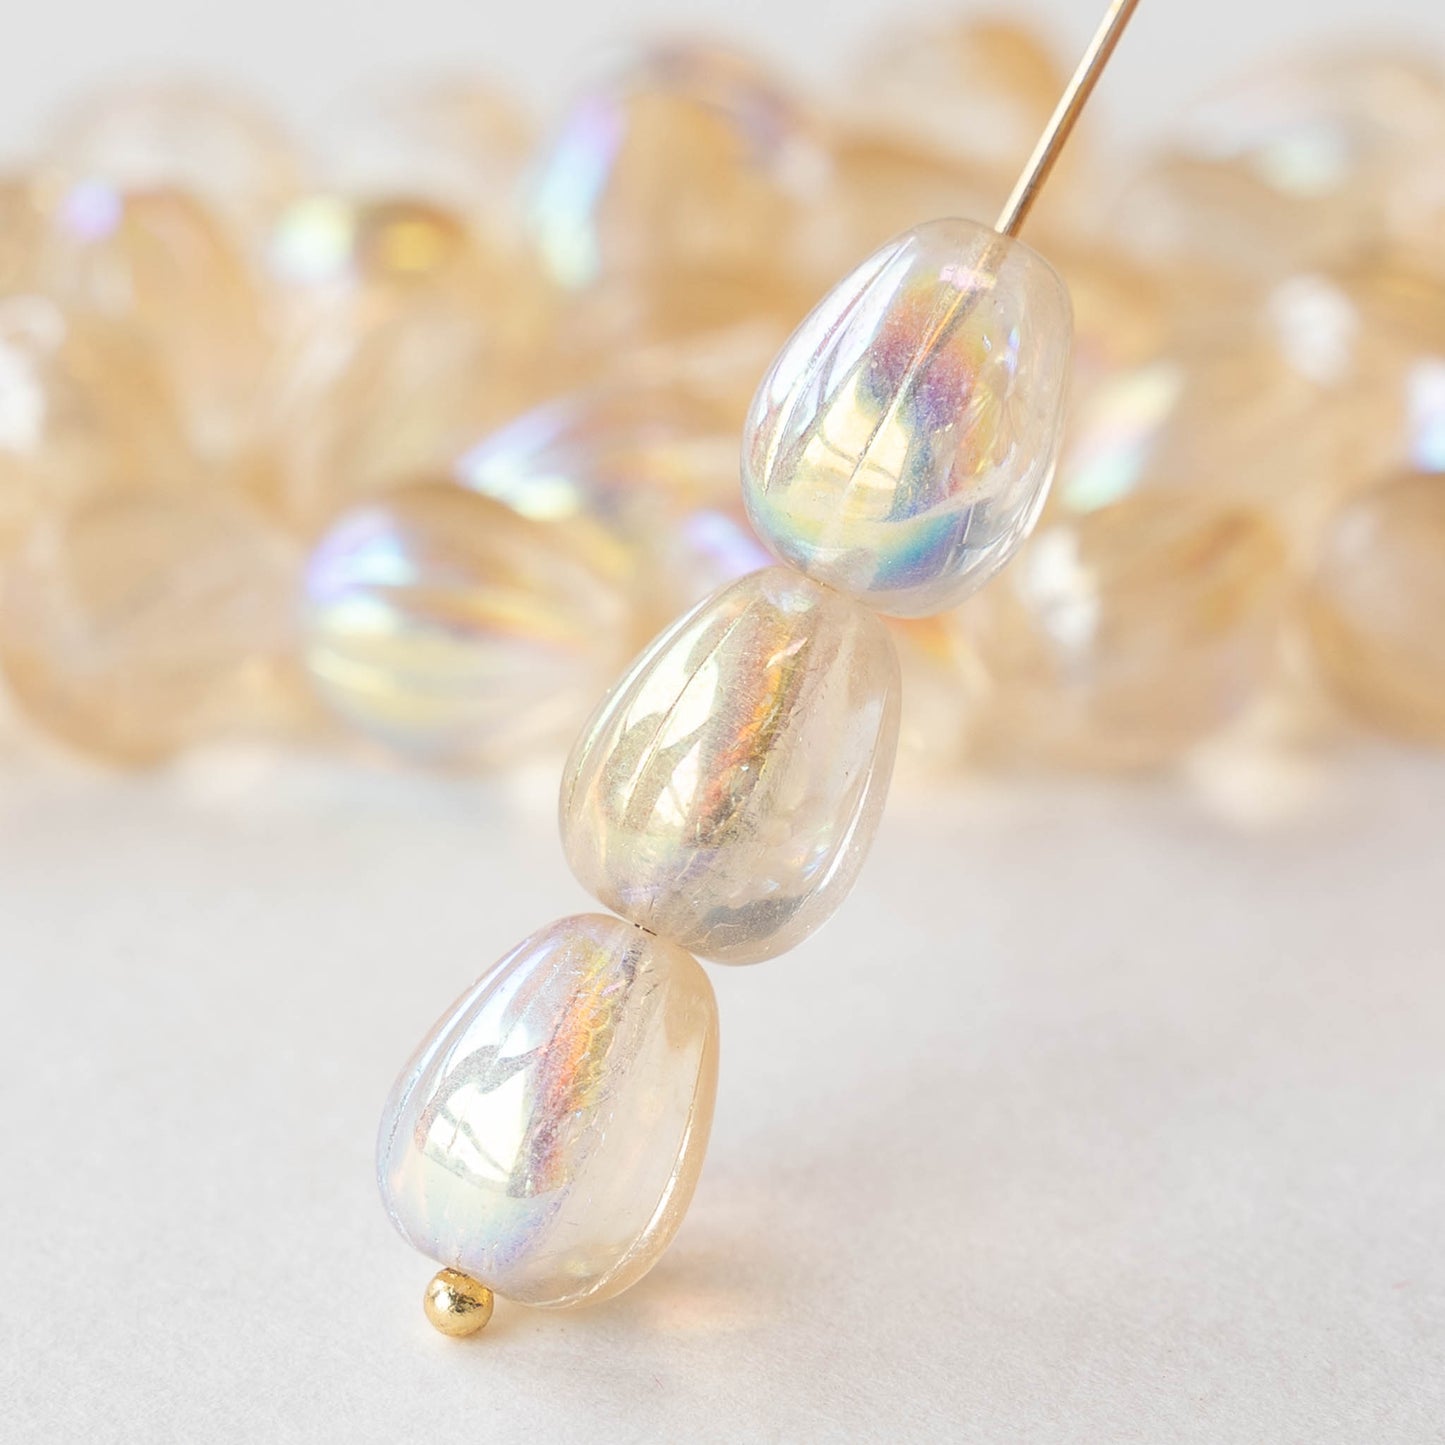 9x11mm Melon Drops -  Champagne AB - 10 beads